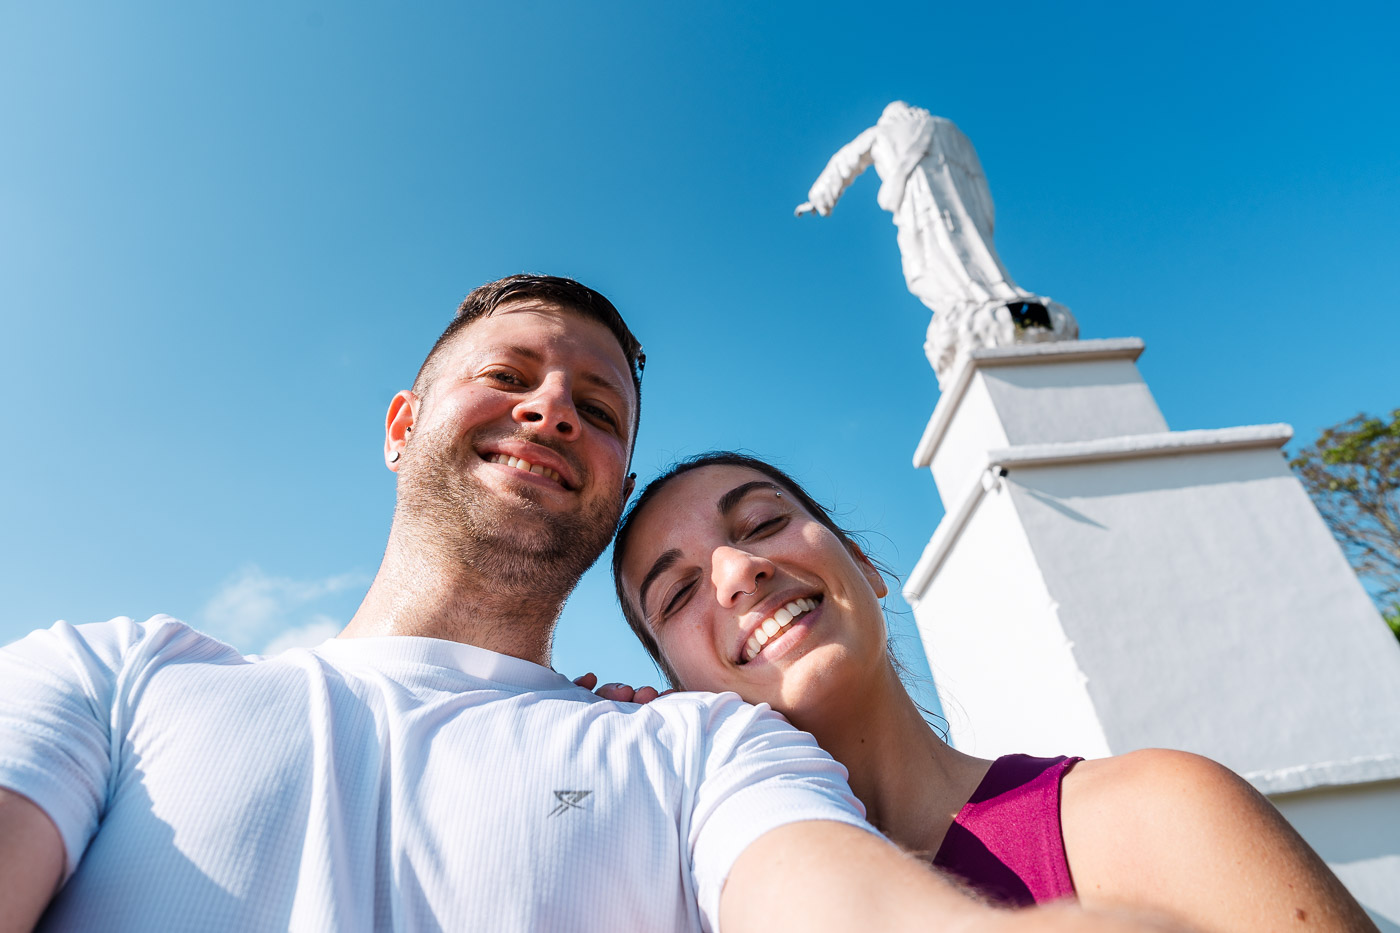 A selfie of Ryan and Sara standing under the Cristo Rey statue.